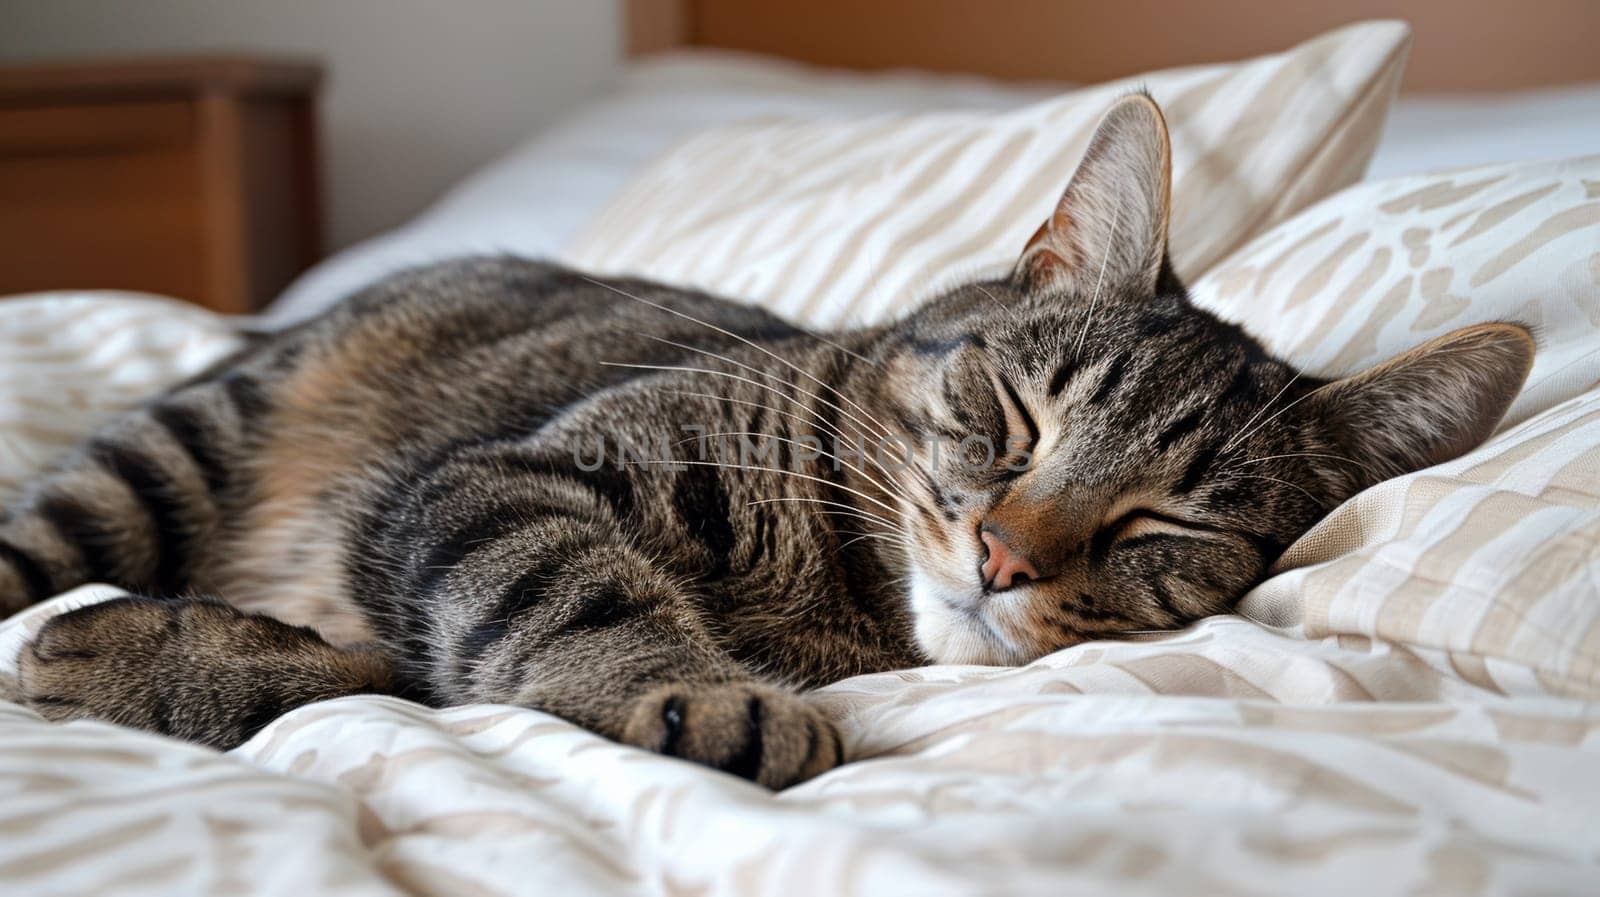 A cat sleeping on a bed with its eyes closed, AI by starush